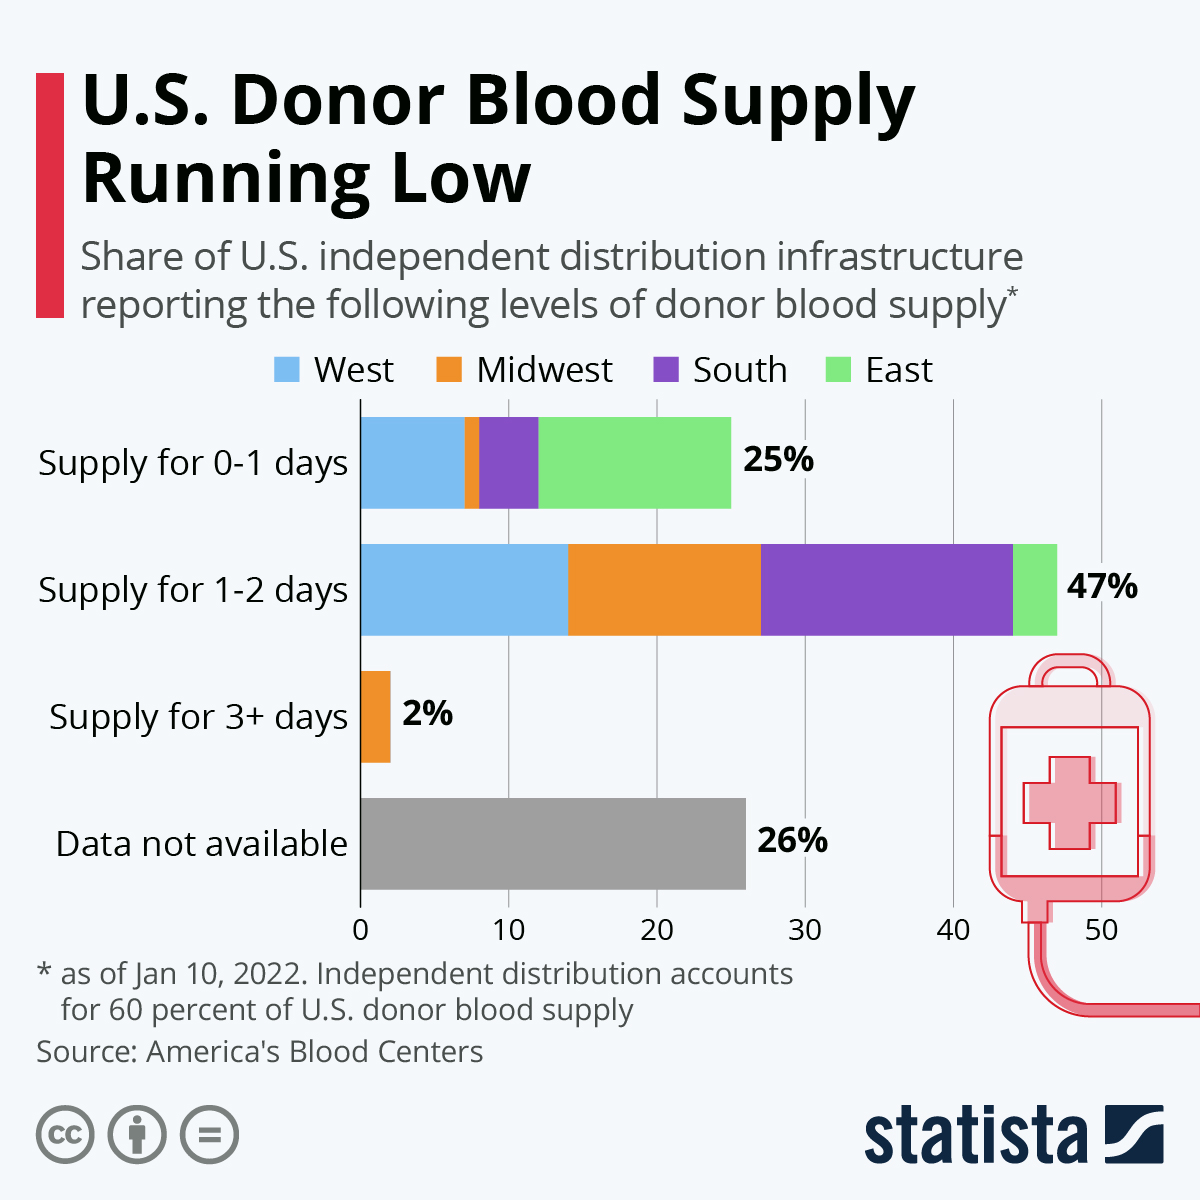 U.S. Donor Blood Supply Running Low